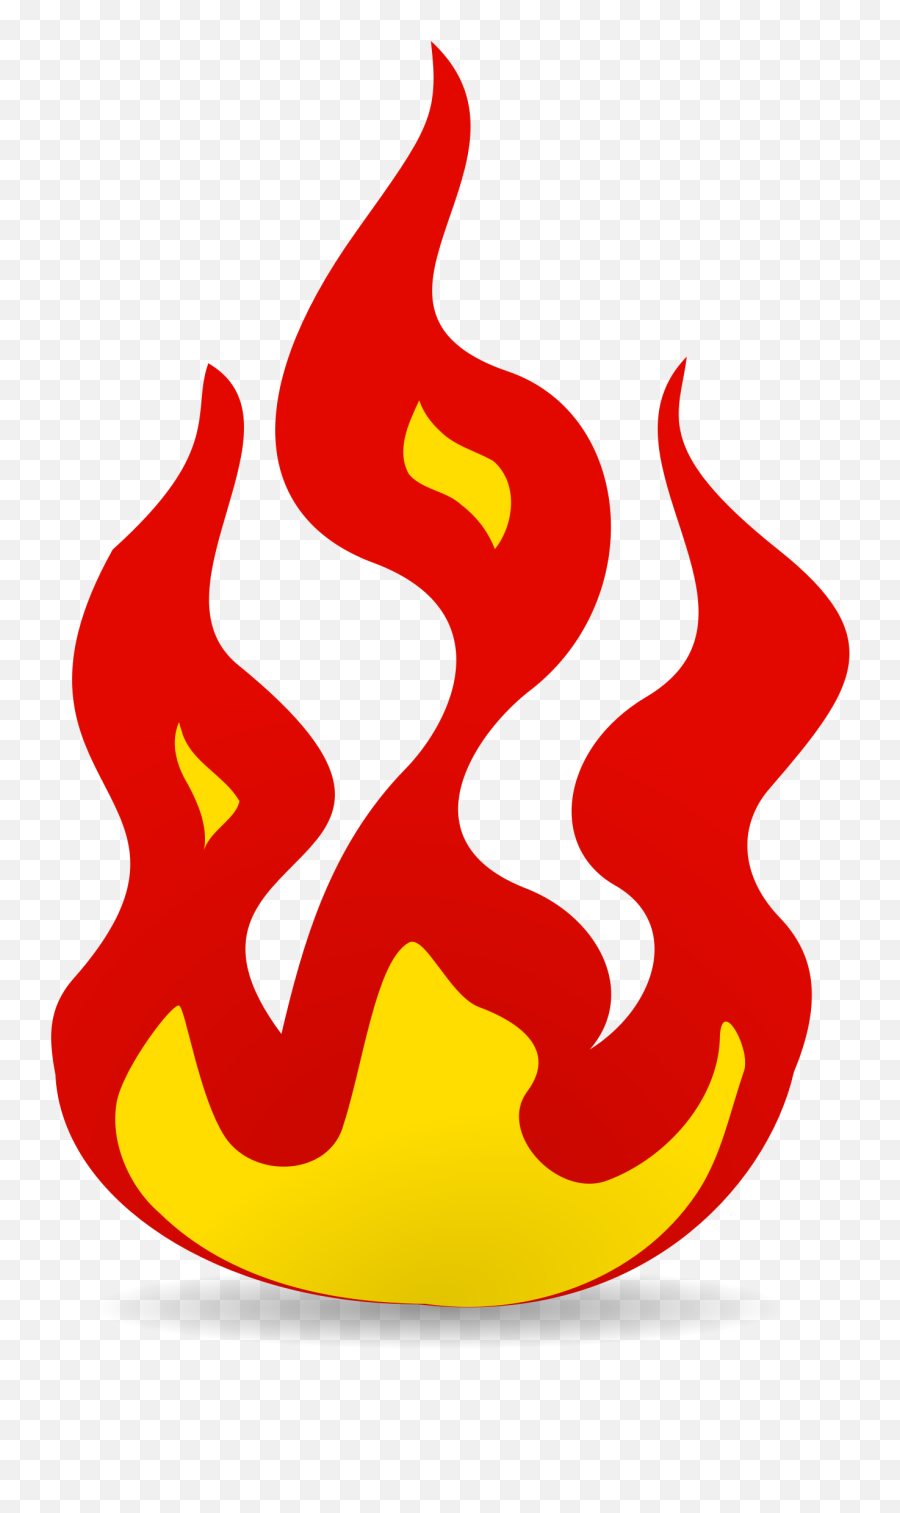 Flame Clipart Simple Fire Flame Simple - Clipart Fire Burning Emoji,Flame Emoji Hat